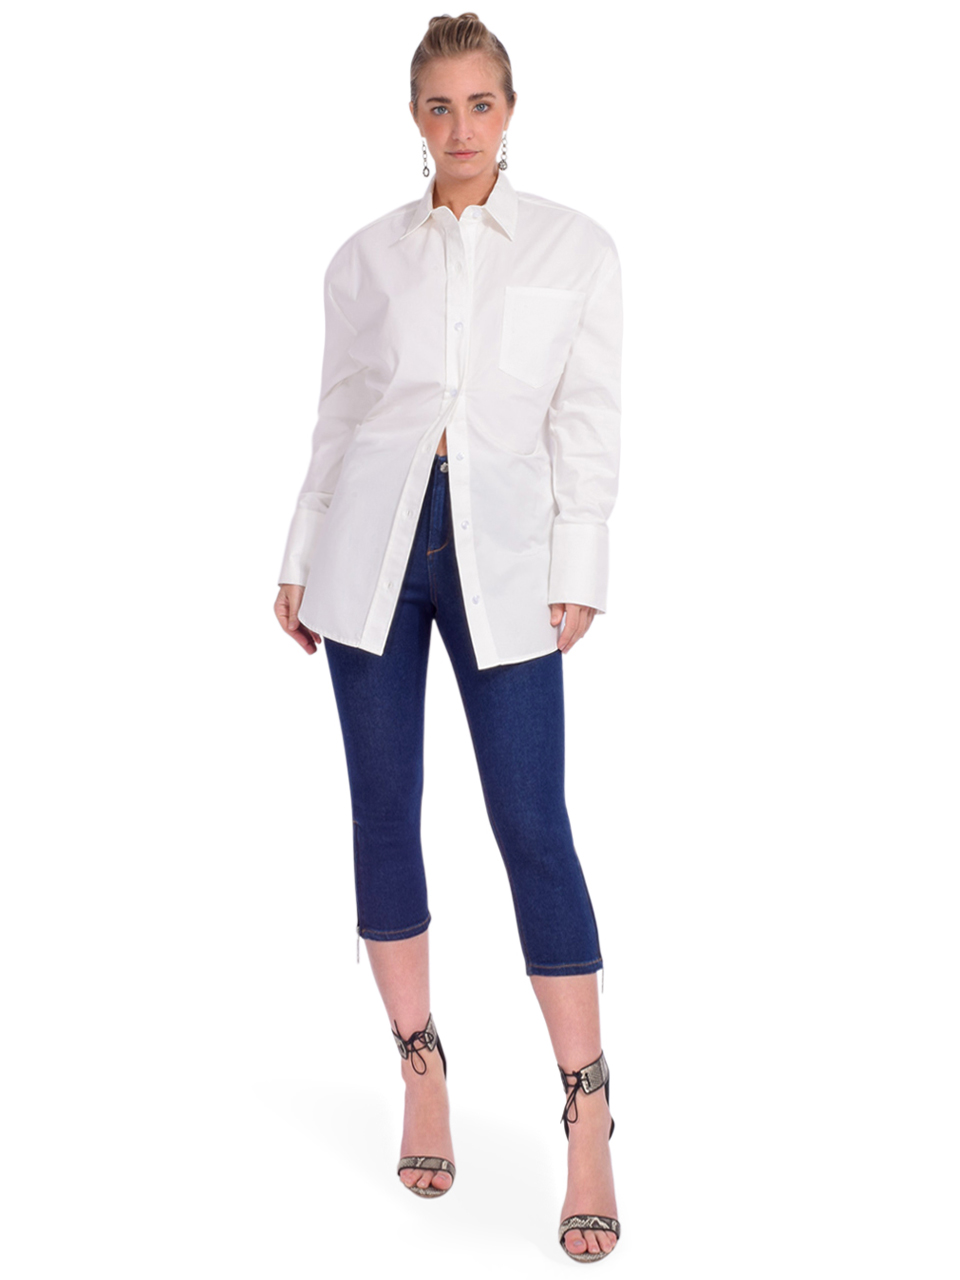 SER.O.YA Eudora Backless Button Down Top in White Full Outfit 

